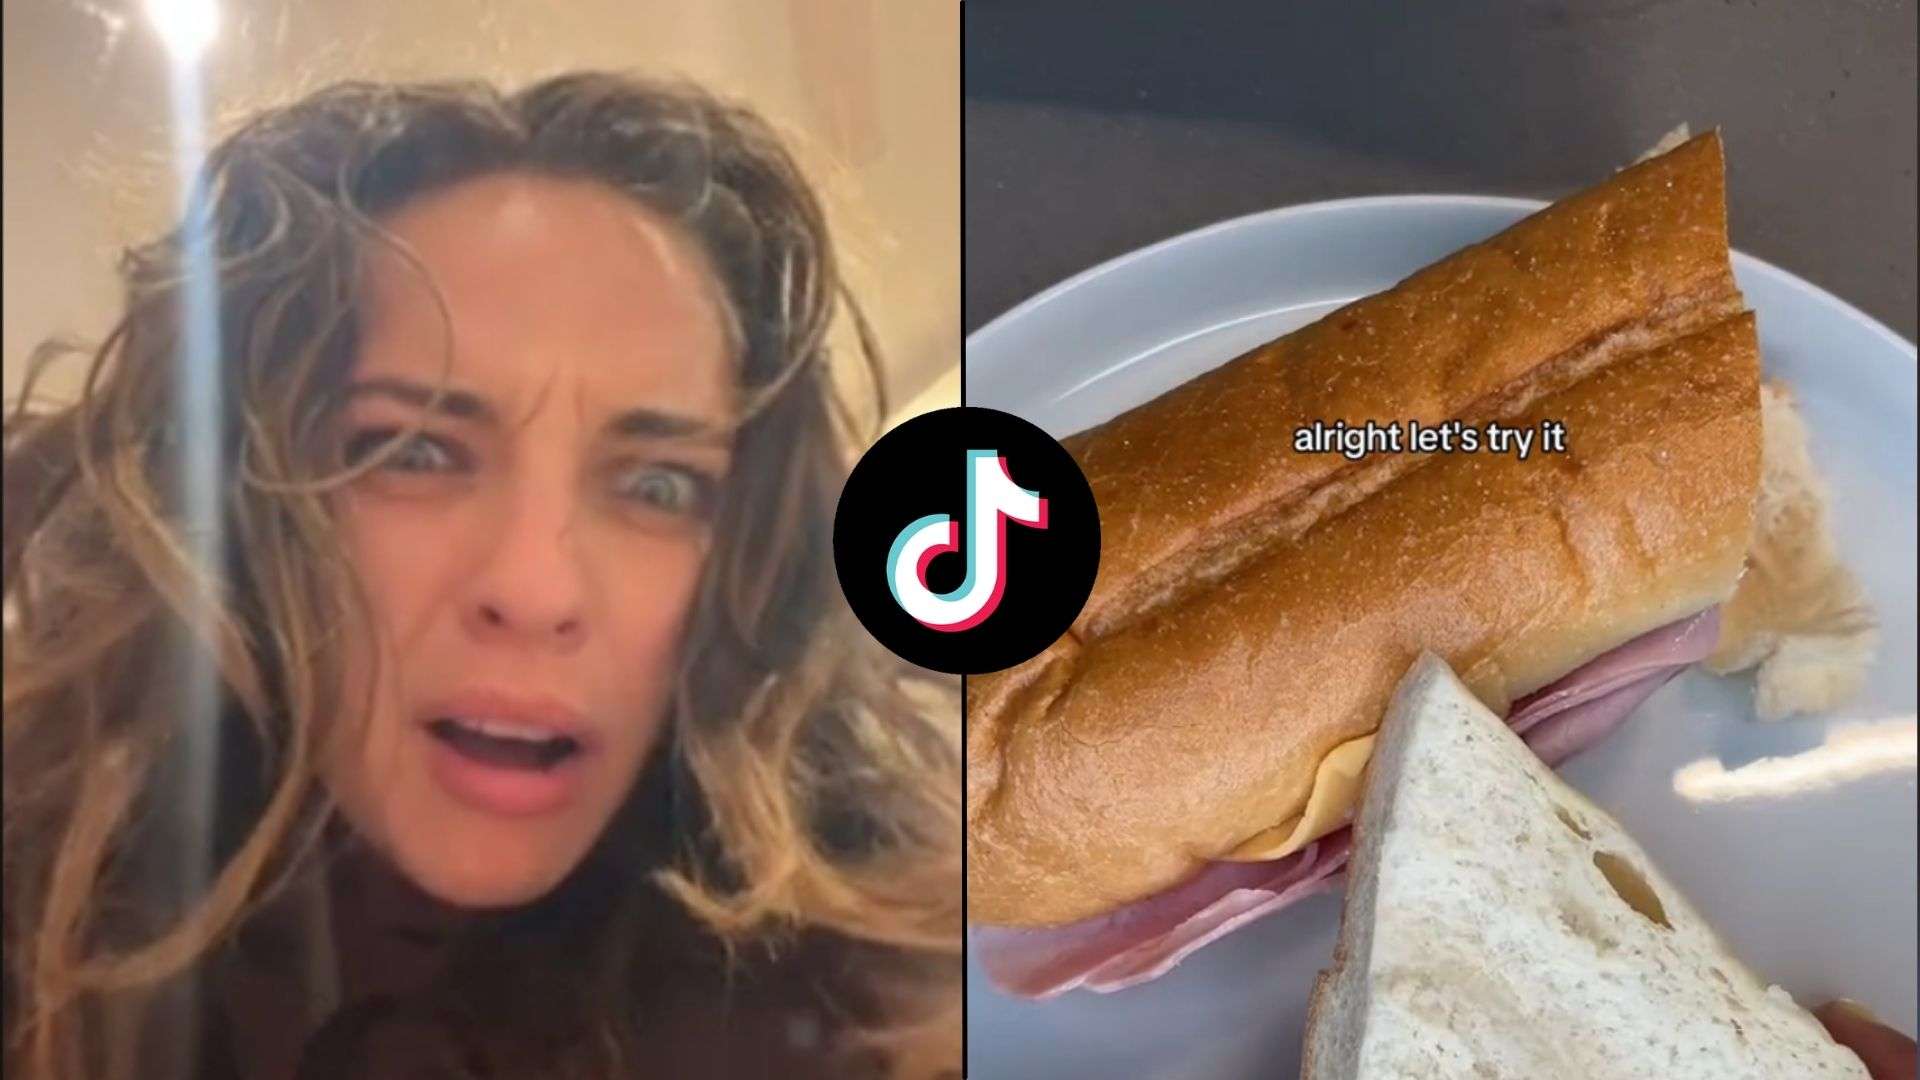 TikTok logo with sandwich and woman looking confused on either side